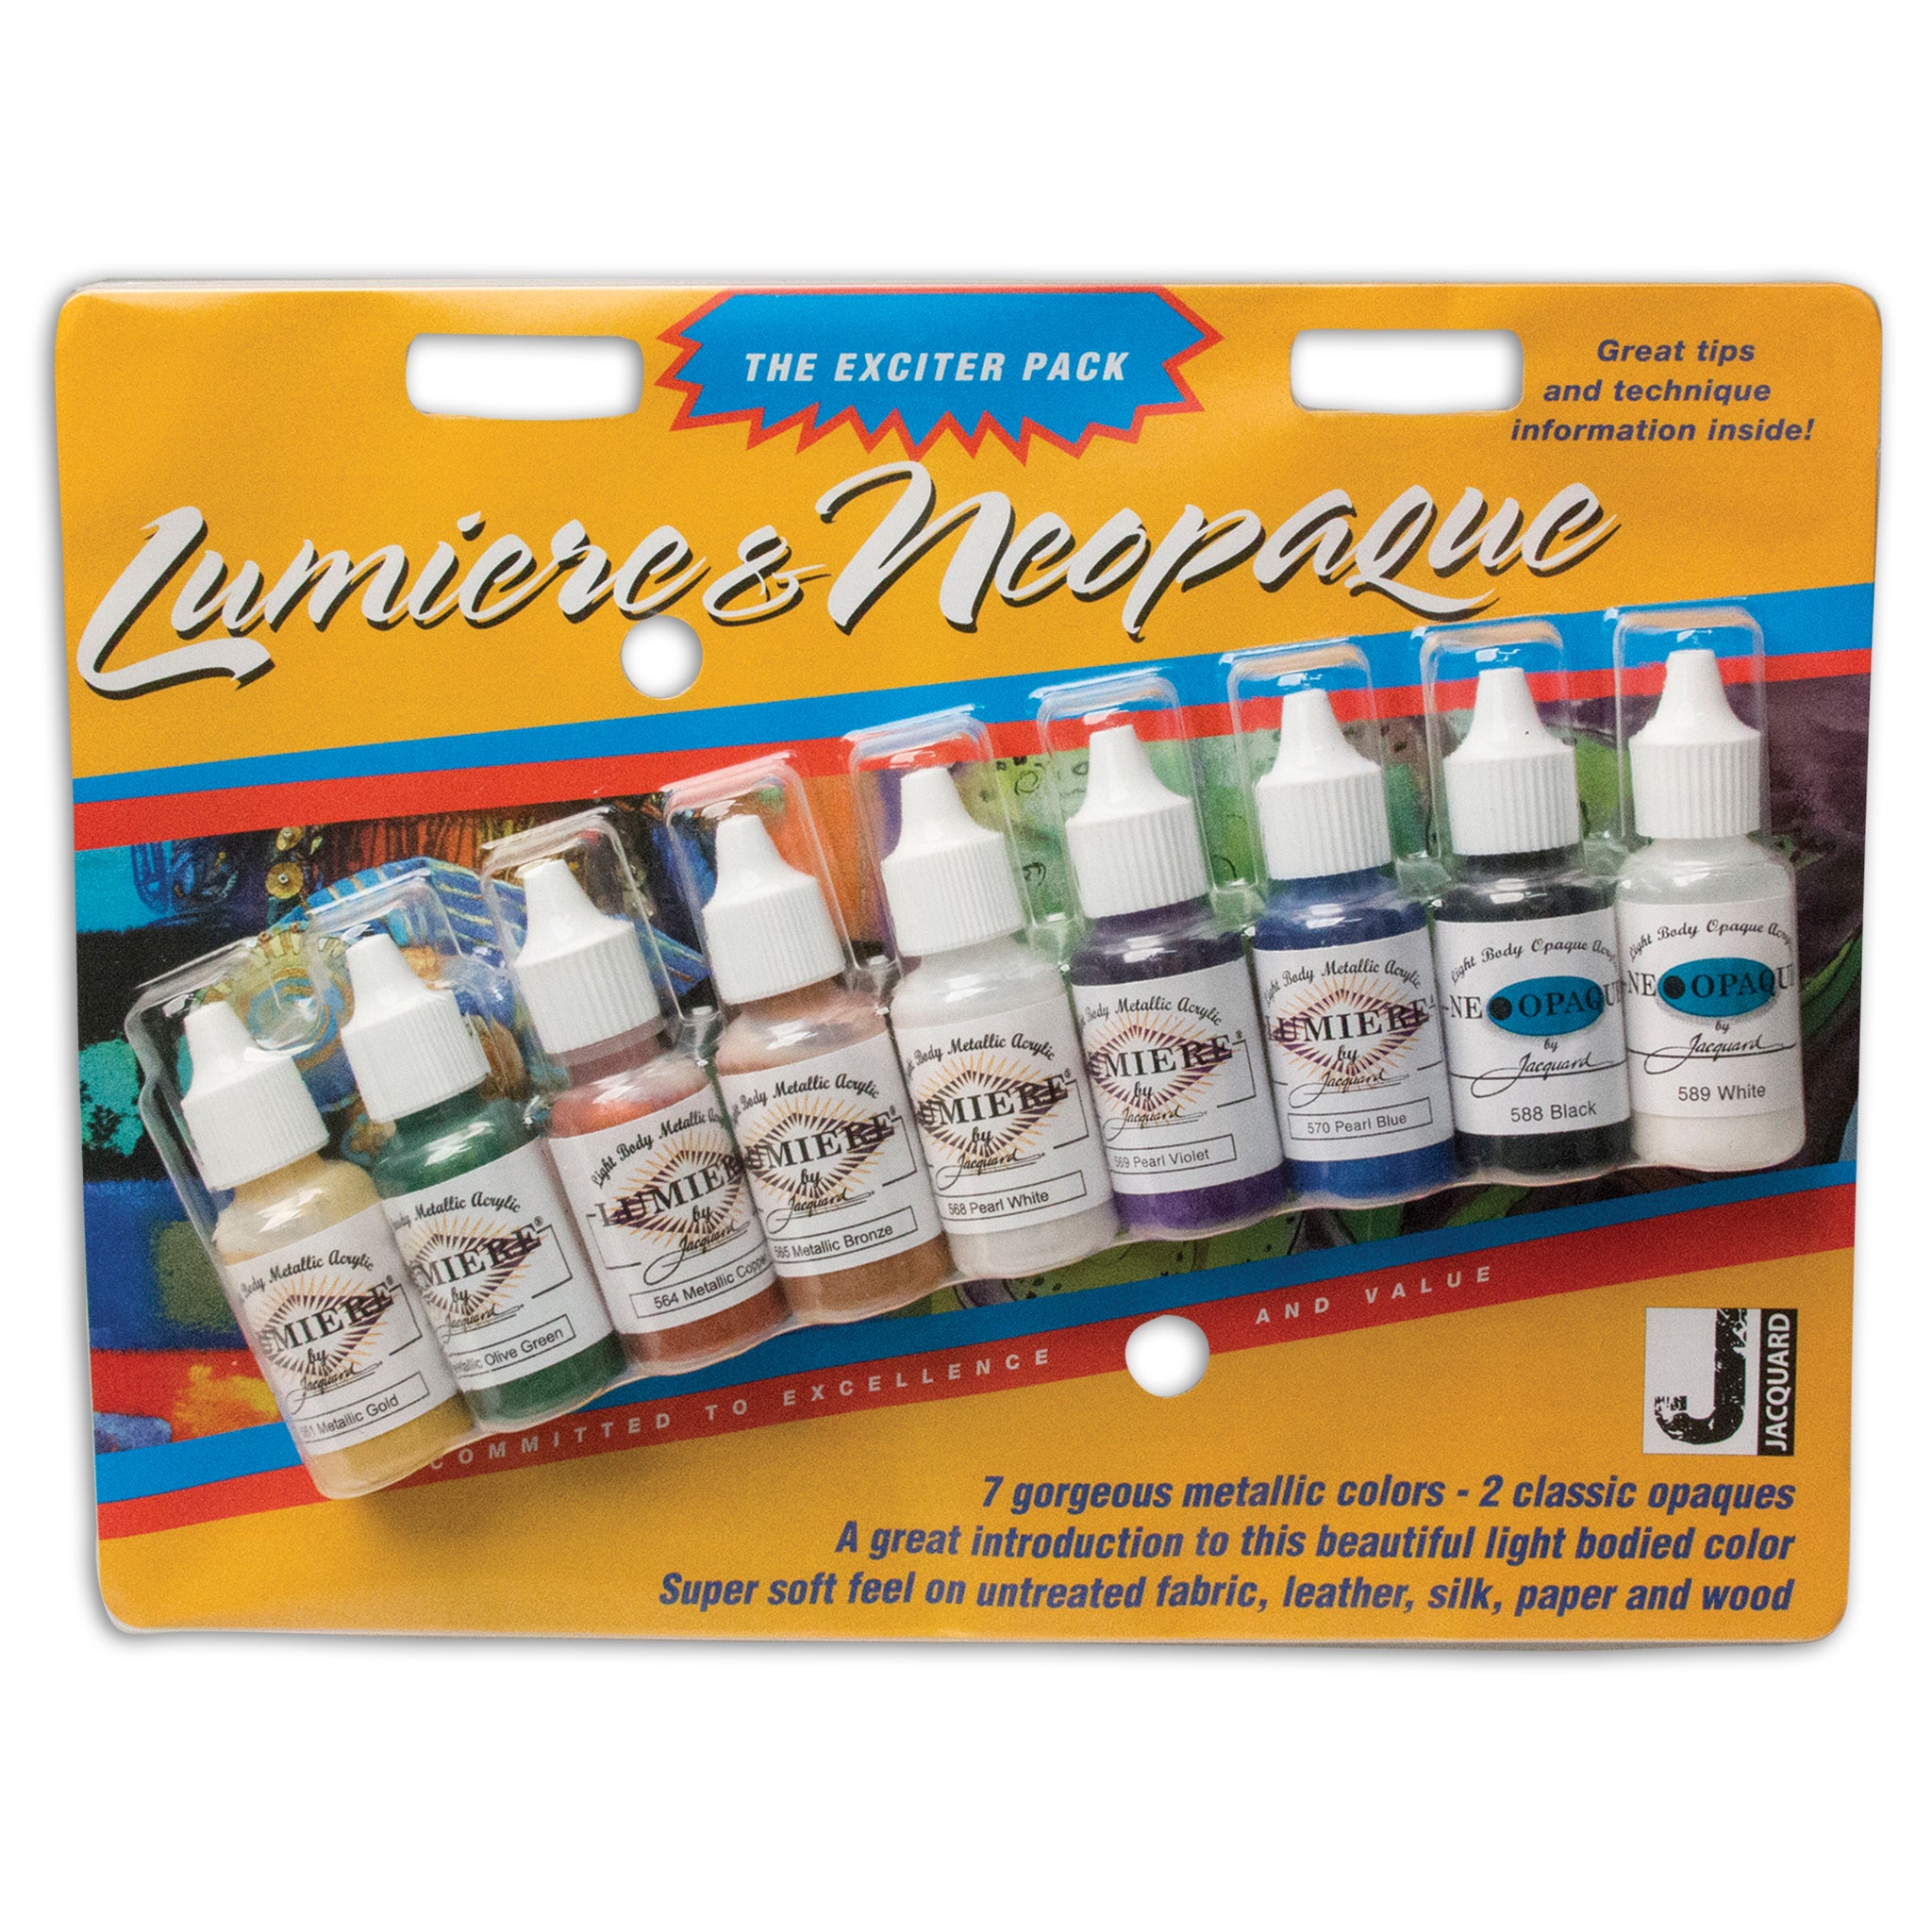 Lumiere / Neopaque Exciter Pack